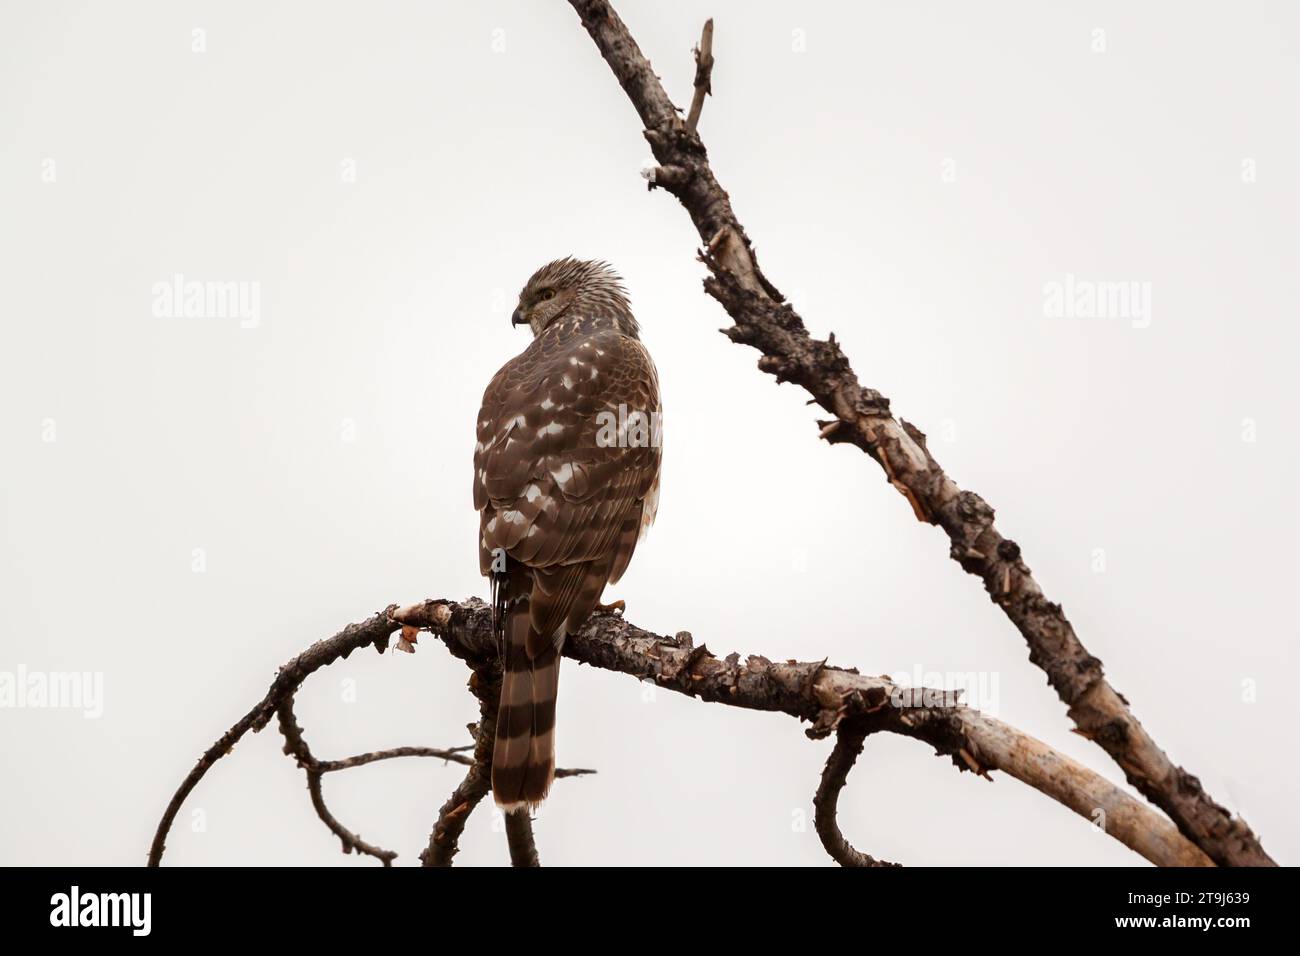 A female merlin (Falco columbarius) perches on the branch of a dead tree on a bright, overcast day. This bird was found near Colorado Springs. Stock Photo